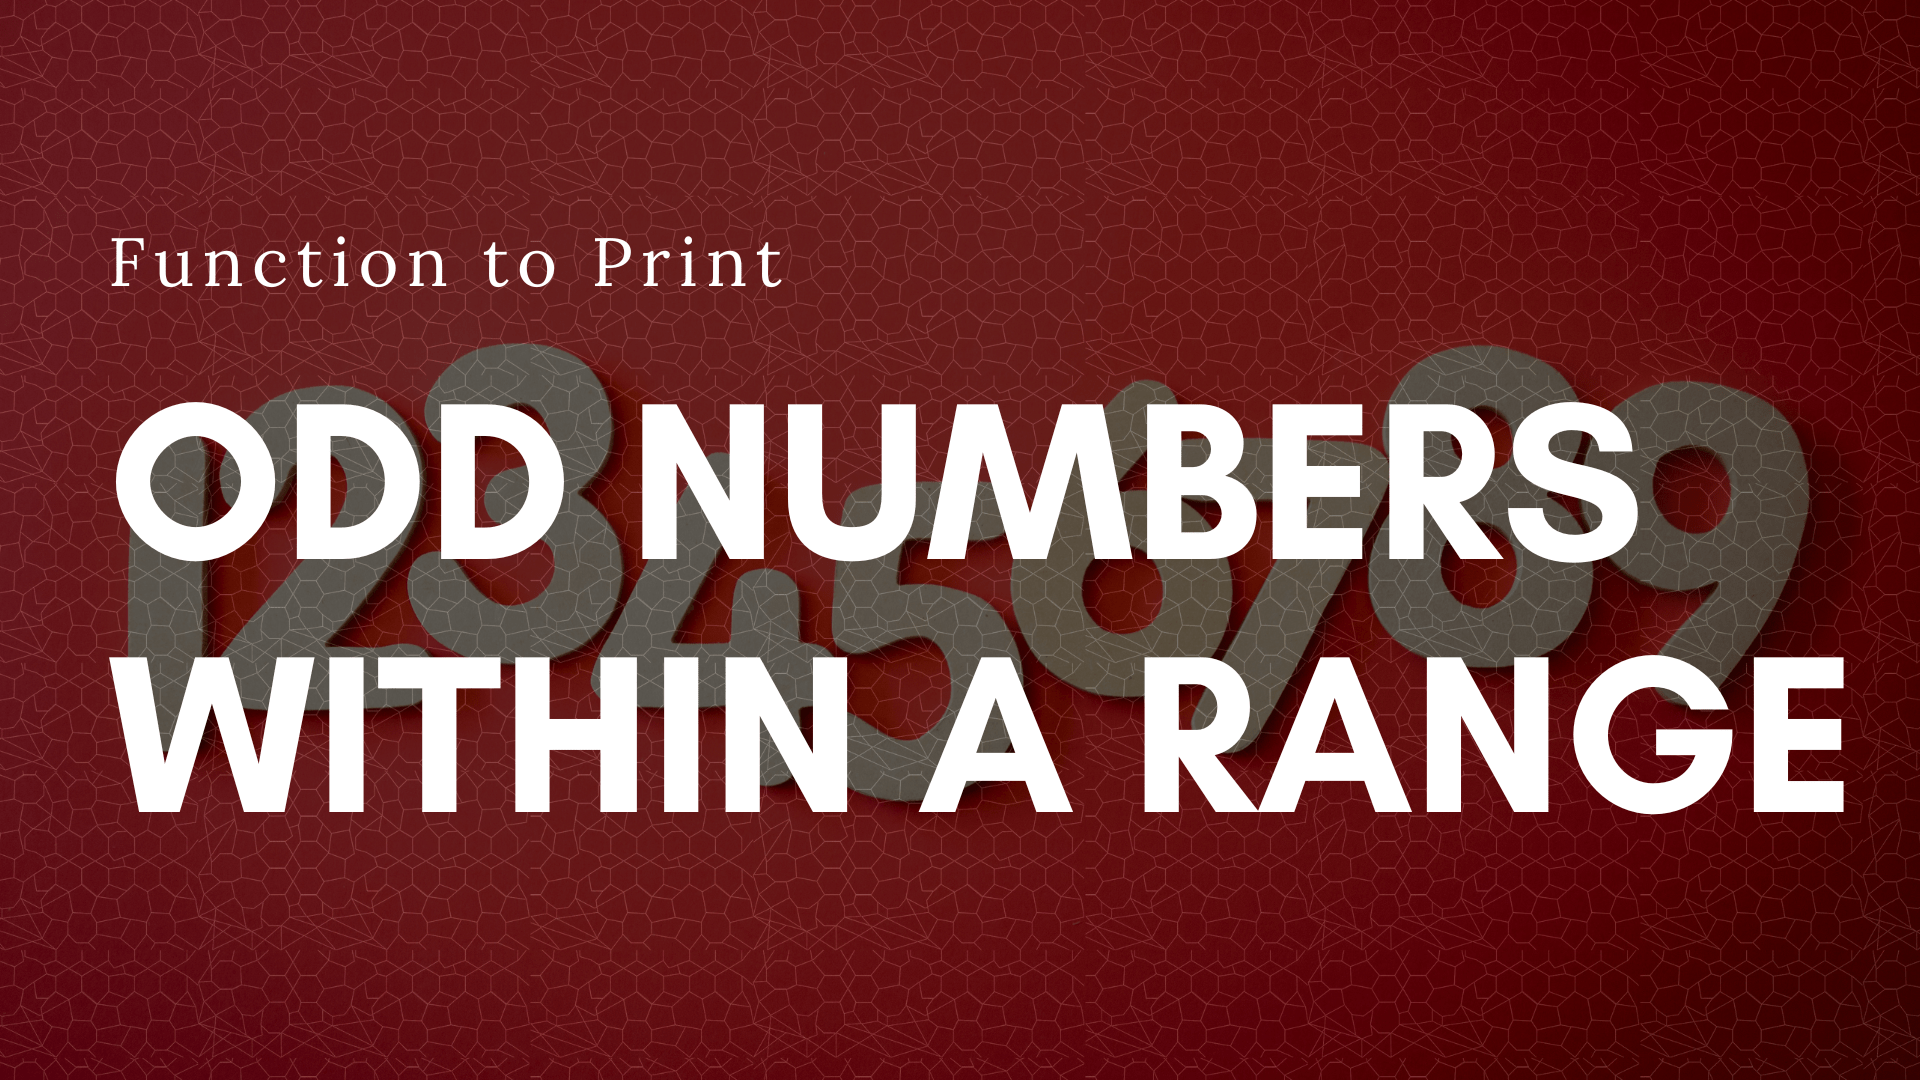 A Function to Print All the Odd Numbers Between a Range in C++